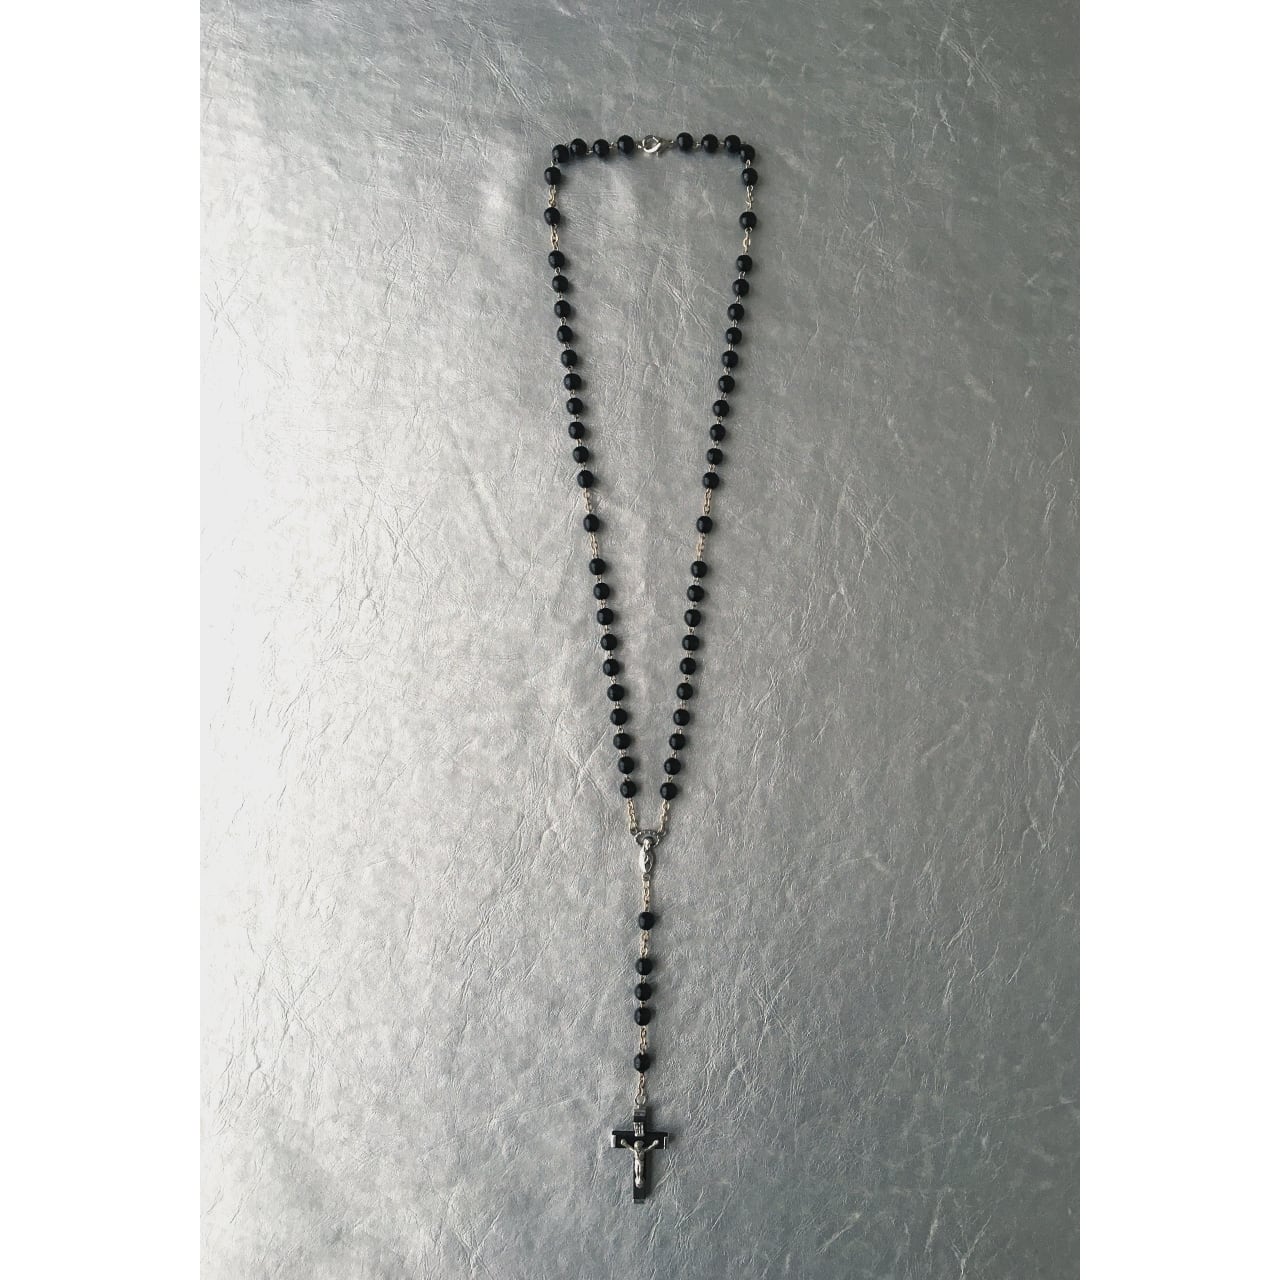 Vintage made in ITALY black wood Christ Maria cross rosario necklace ヴィンテージ  イタリア製 ブラック ウッド キリスト 聖母マリア クロス ロザリオ ネックレス  POOL VINTAGE